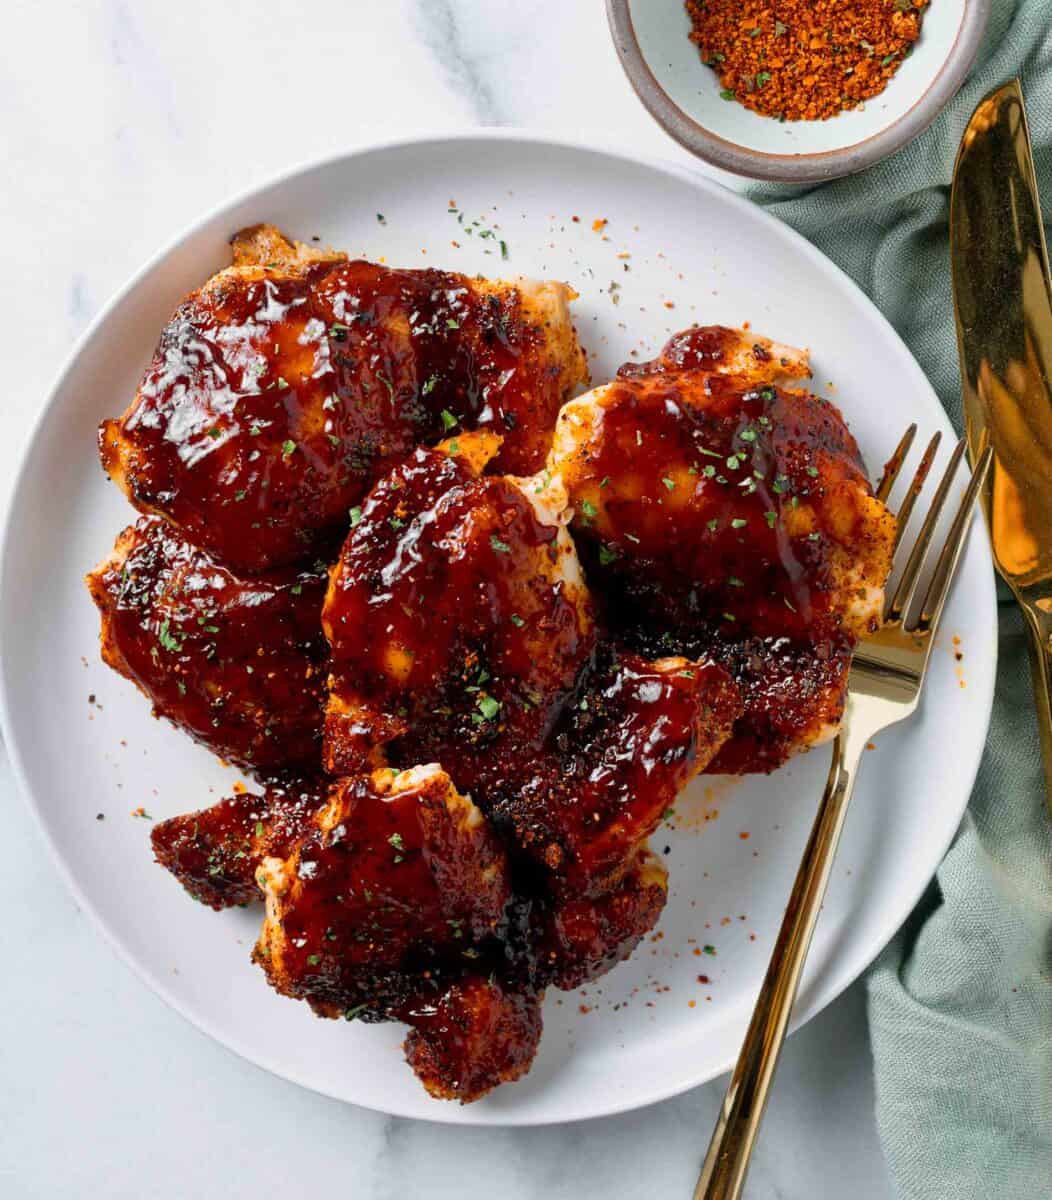 baked bbq chicken thighs with bbq sauce slathered on top next to a gold fork and knife